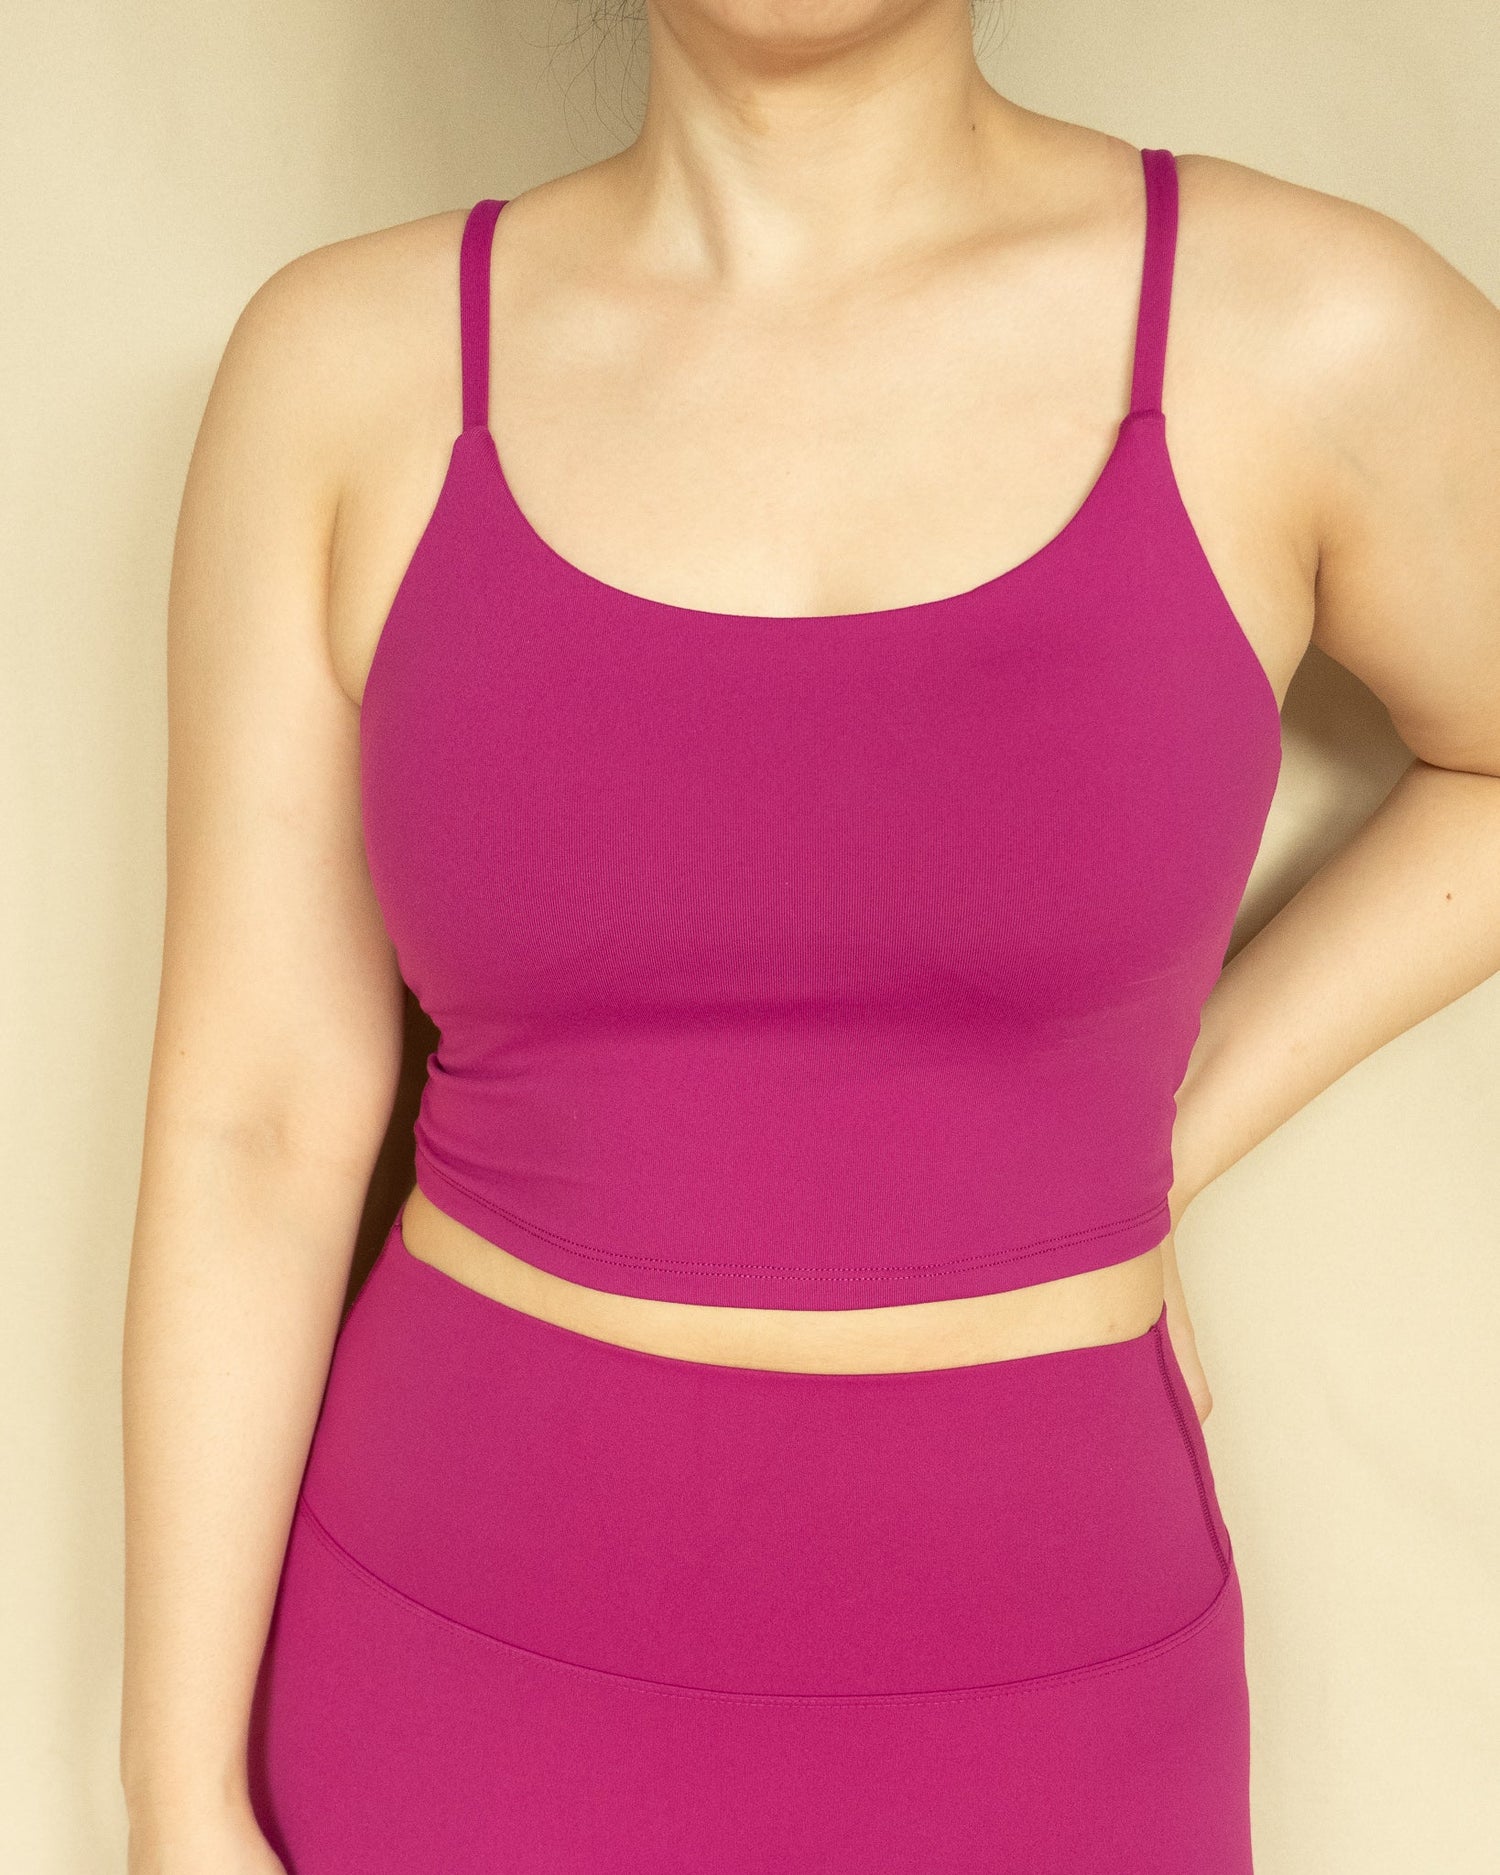 Dare top in Orchid - New Day Activewear